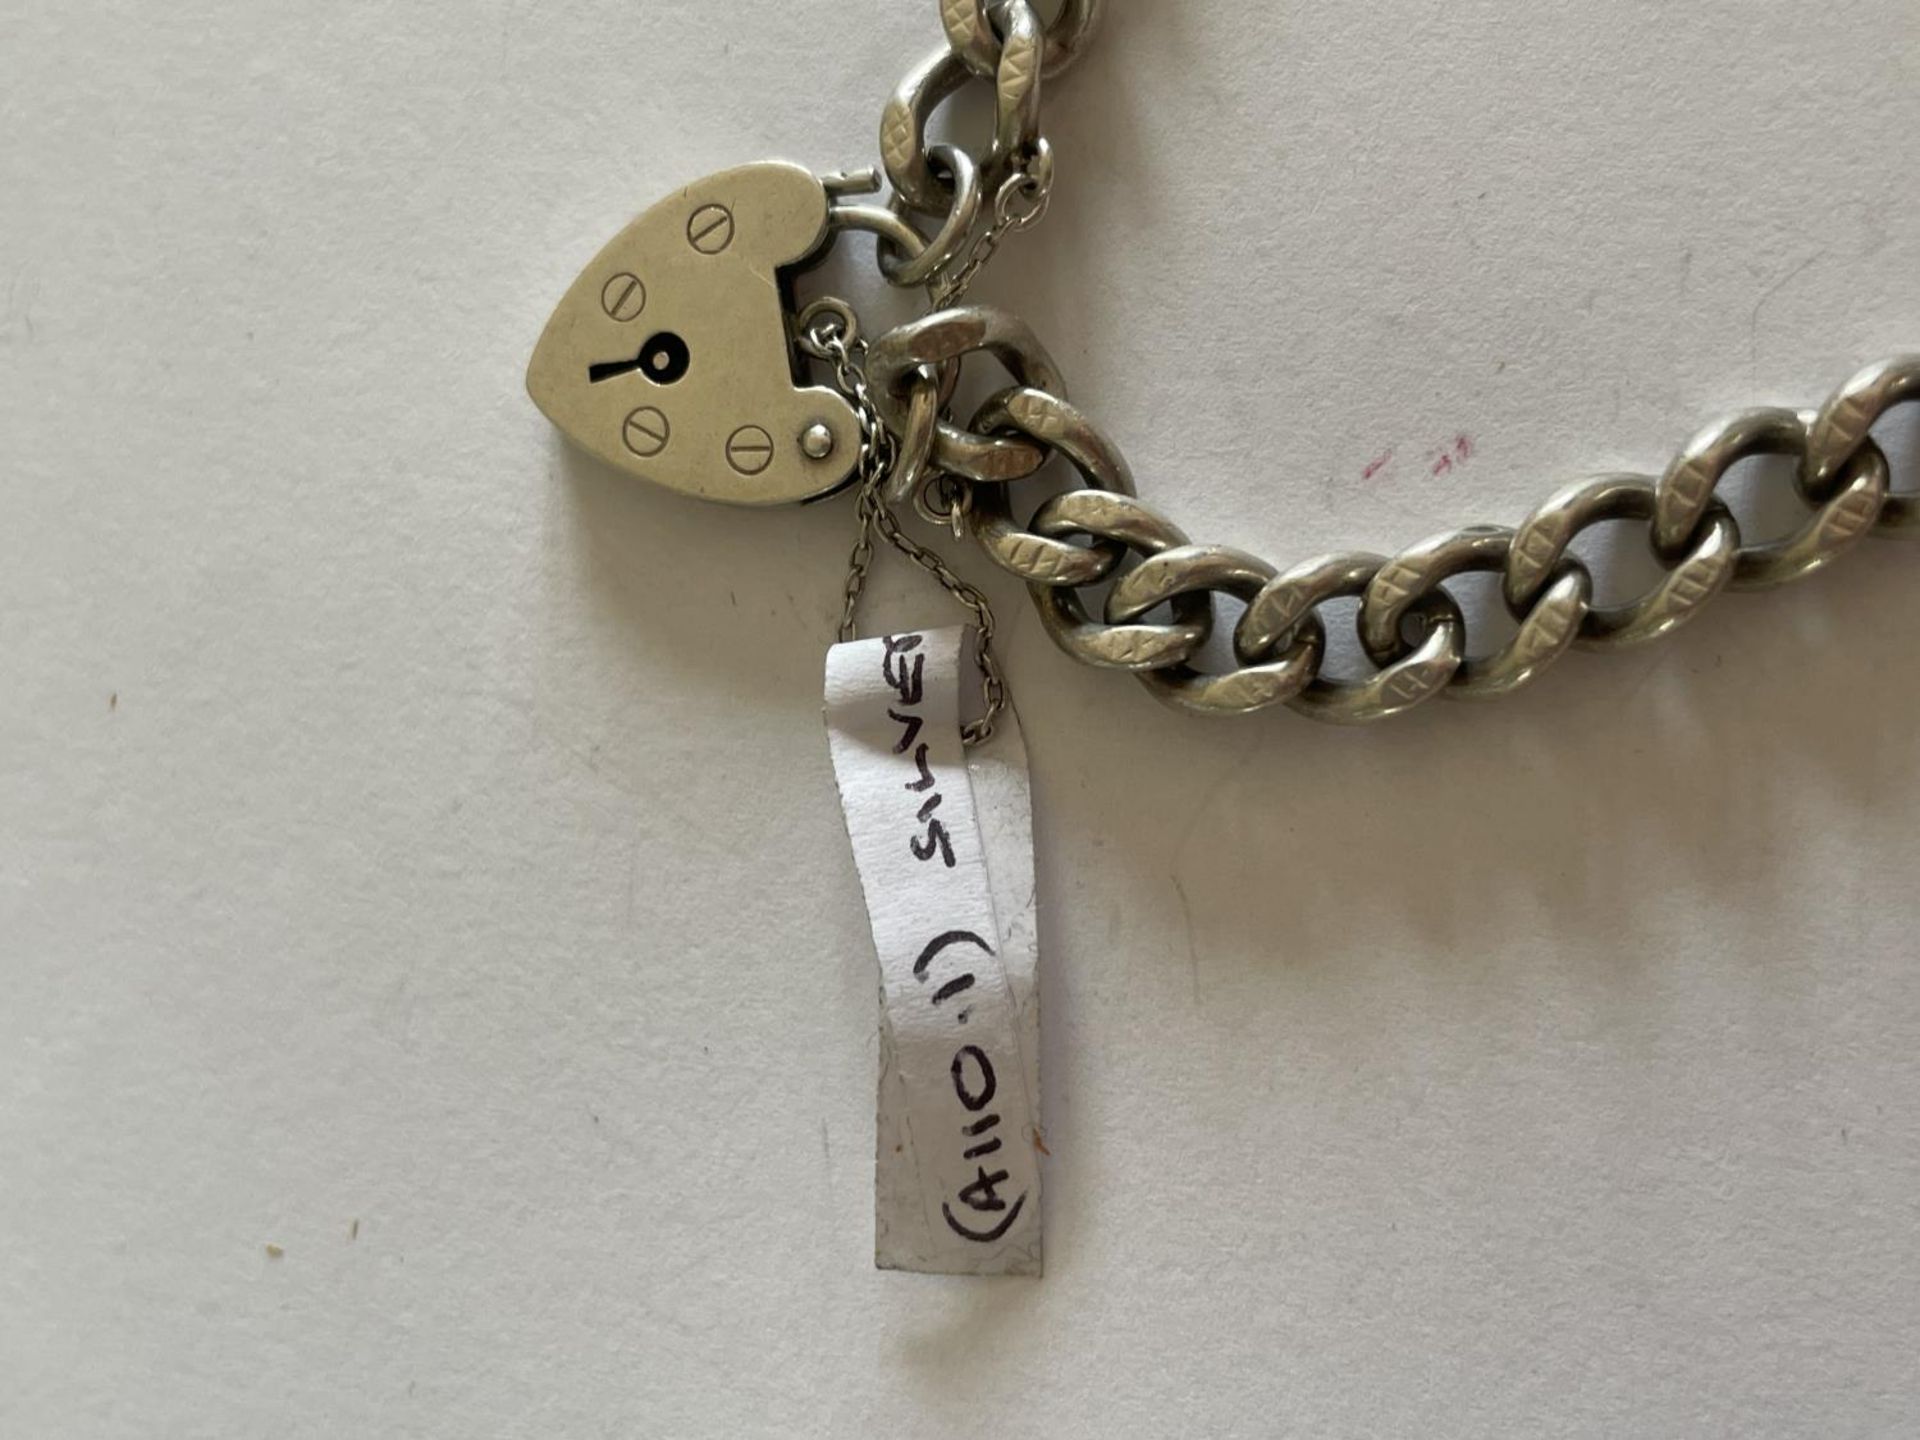 A HEAVY SILVER BRACELET WITH A HEART PADLOCK - Image 2 of 2